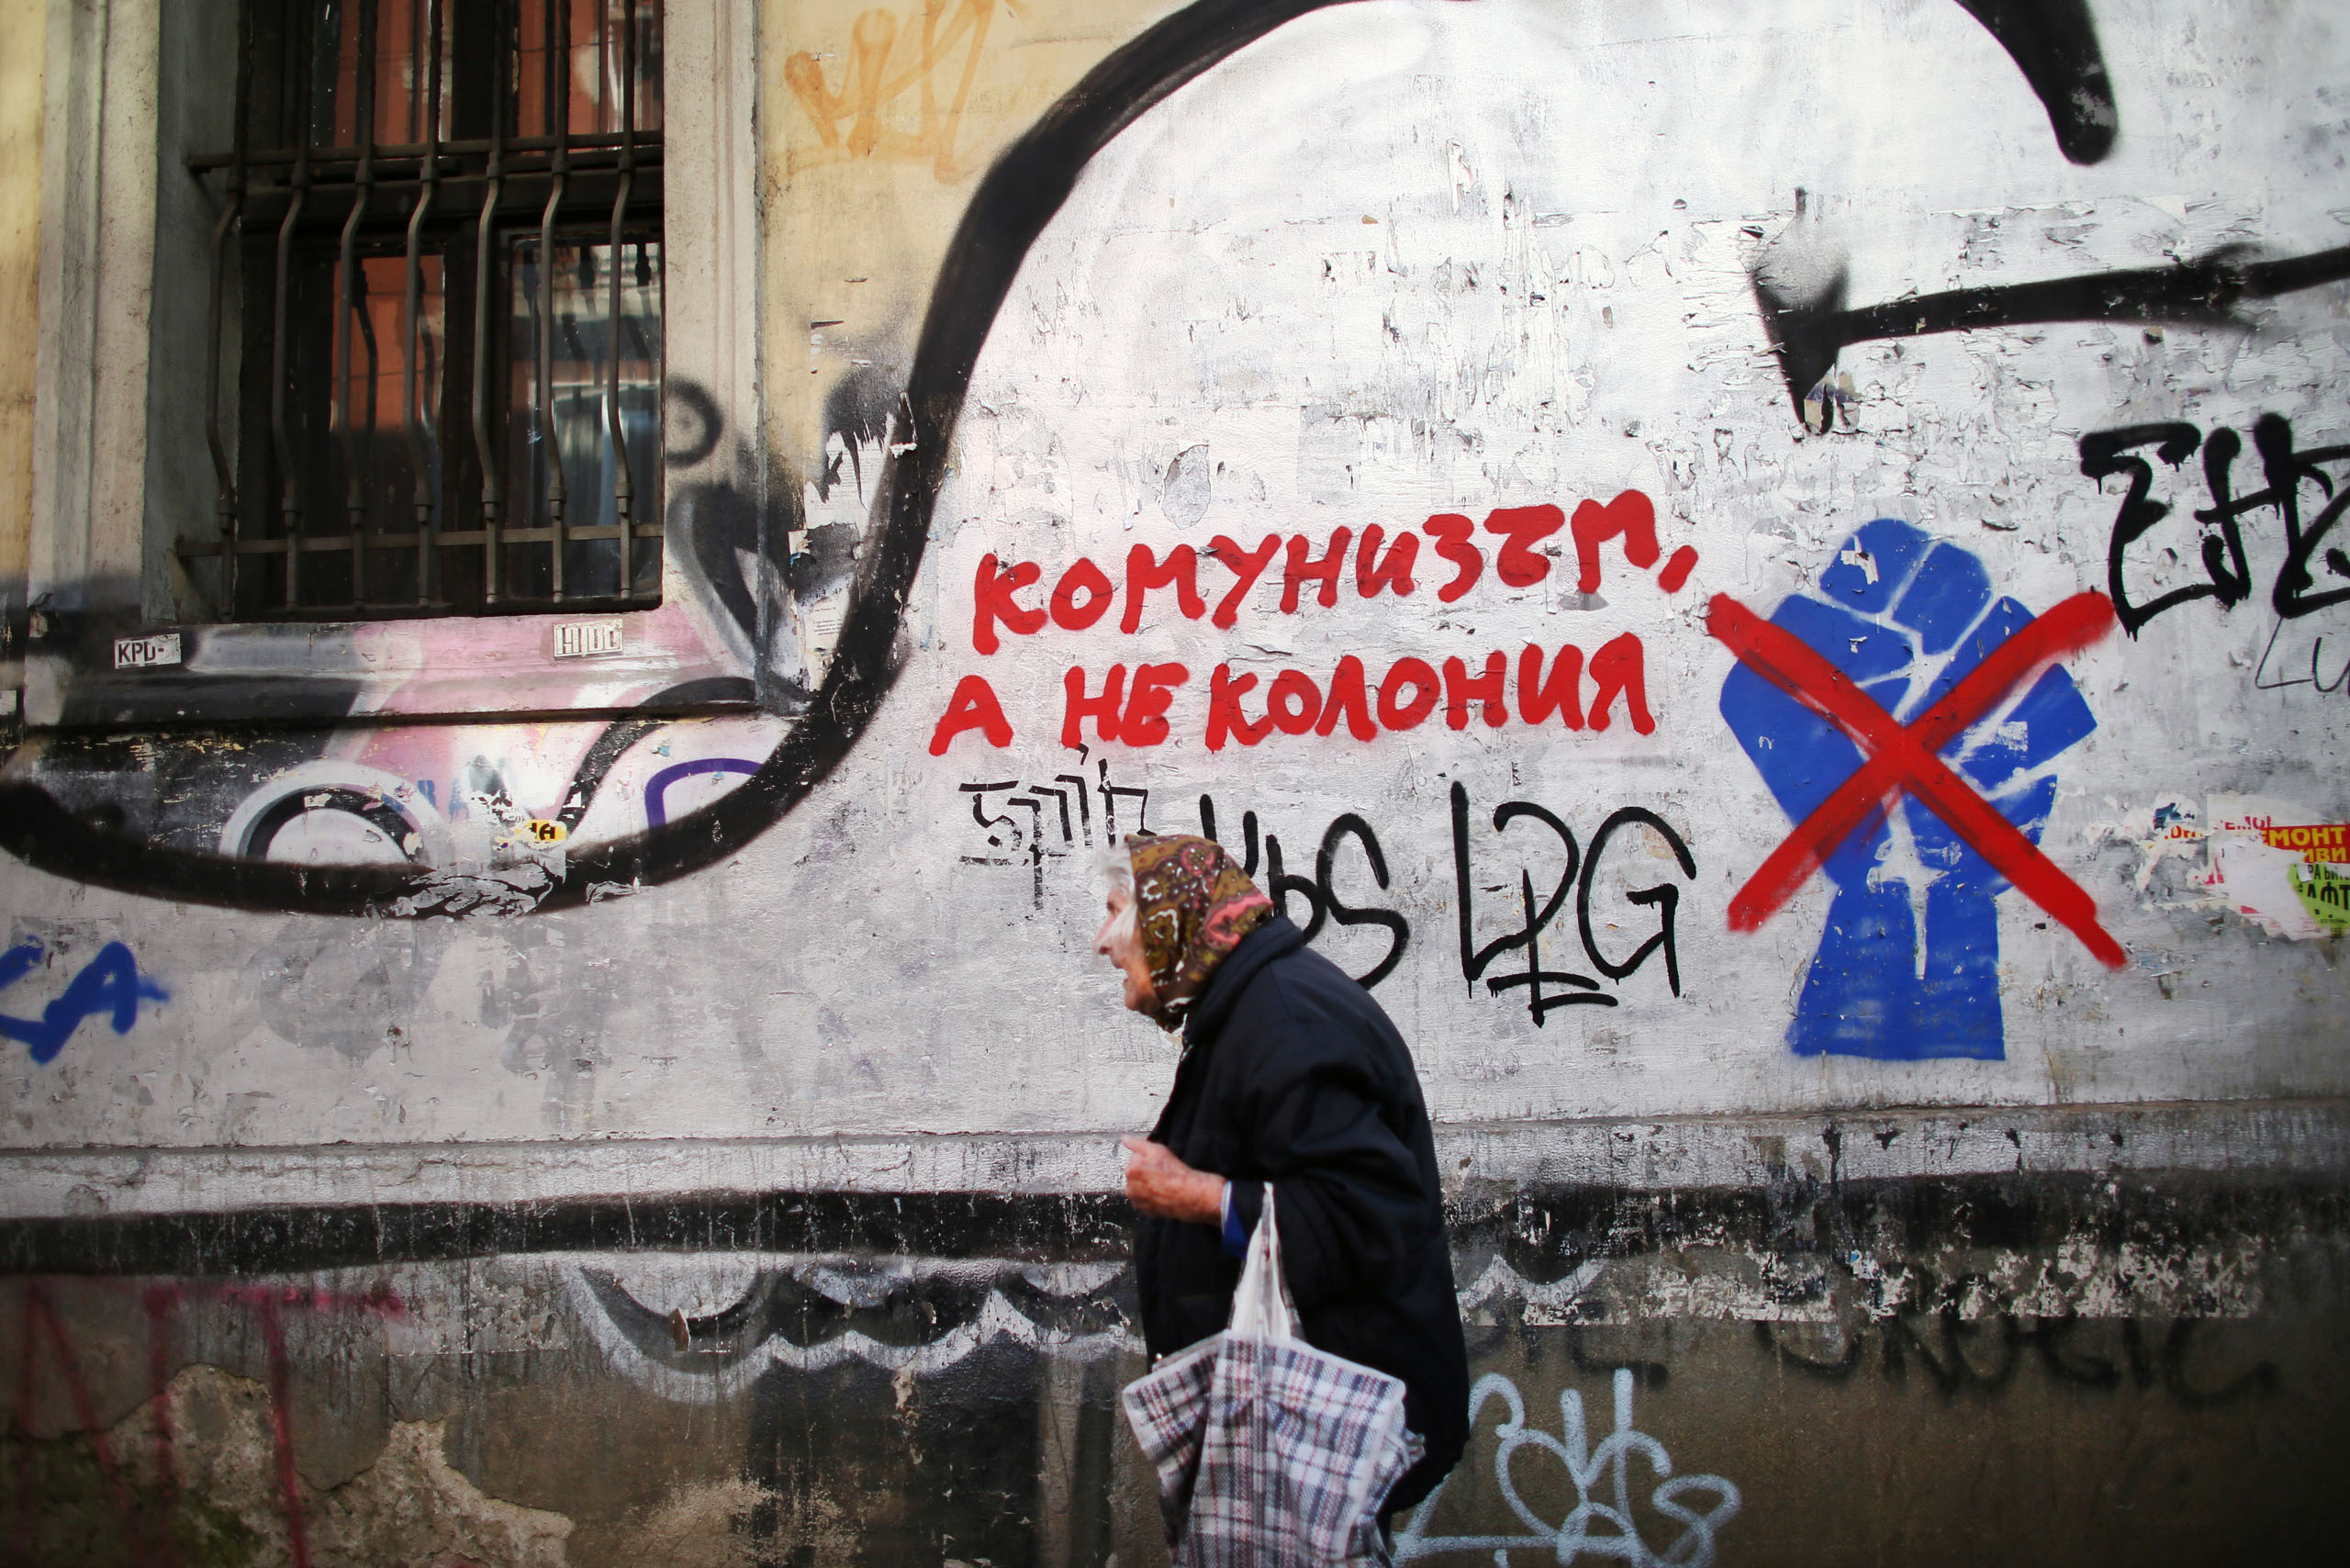 A woman walks by graffiti of a fist in Sofia, the capital of Bulgaria, Oct. 4, 2014. The fist came to symbolize civic protests against political corruption in 2013. It has been crossed off by a second layer of graffiti, with an adjacent sign that reads, 'Communism, but not a Colony,' in likely reference to what some political parties decry as Westernization of interests in the country.